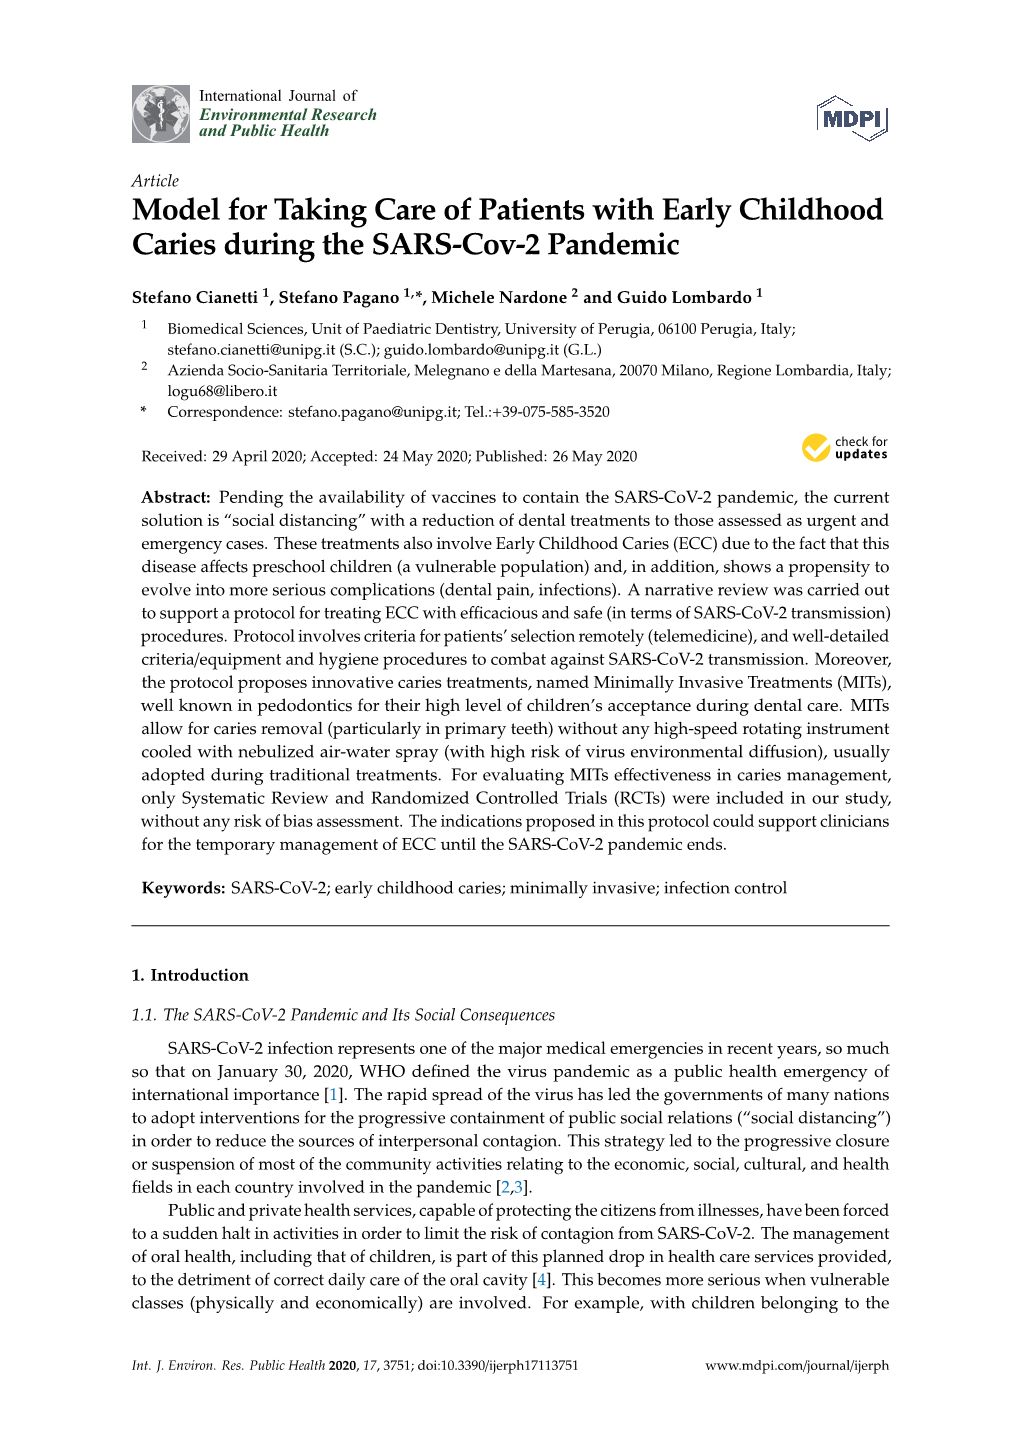 Model for Taking Care of Patients with Early Childhood Caries During the SARS-Cov-2 Pandemic